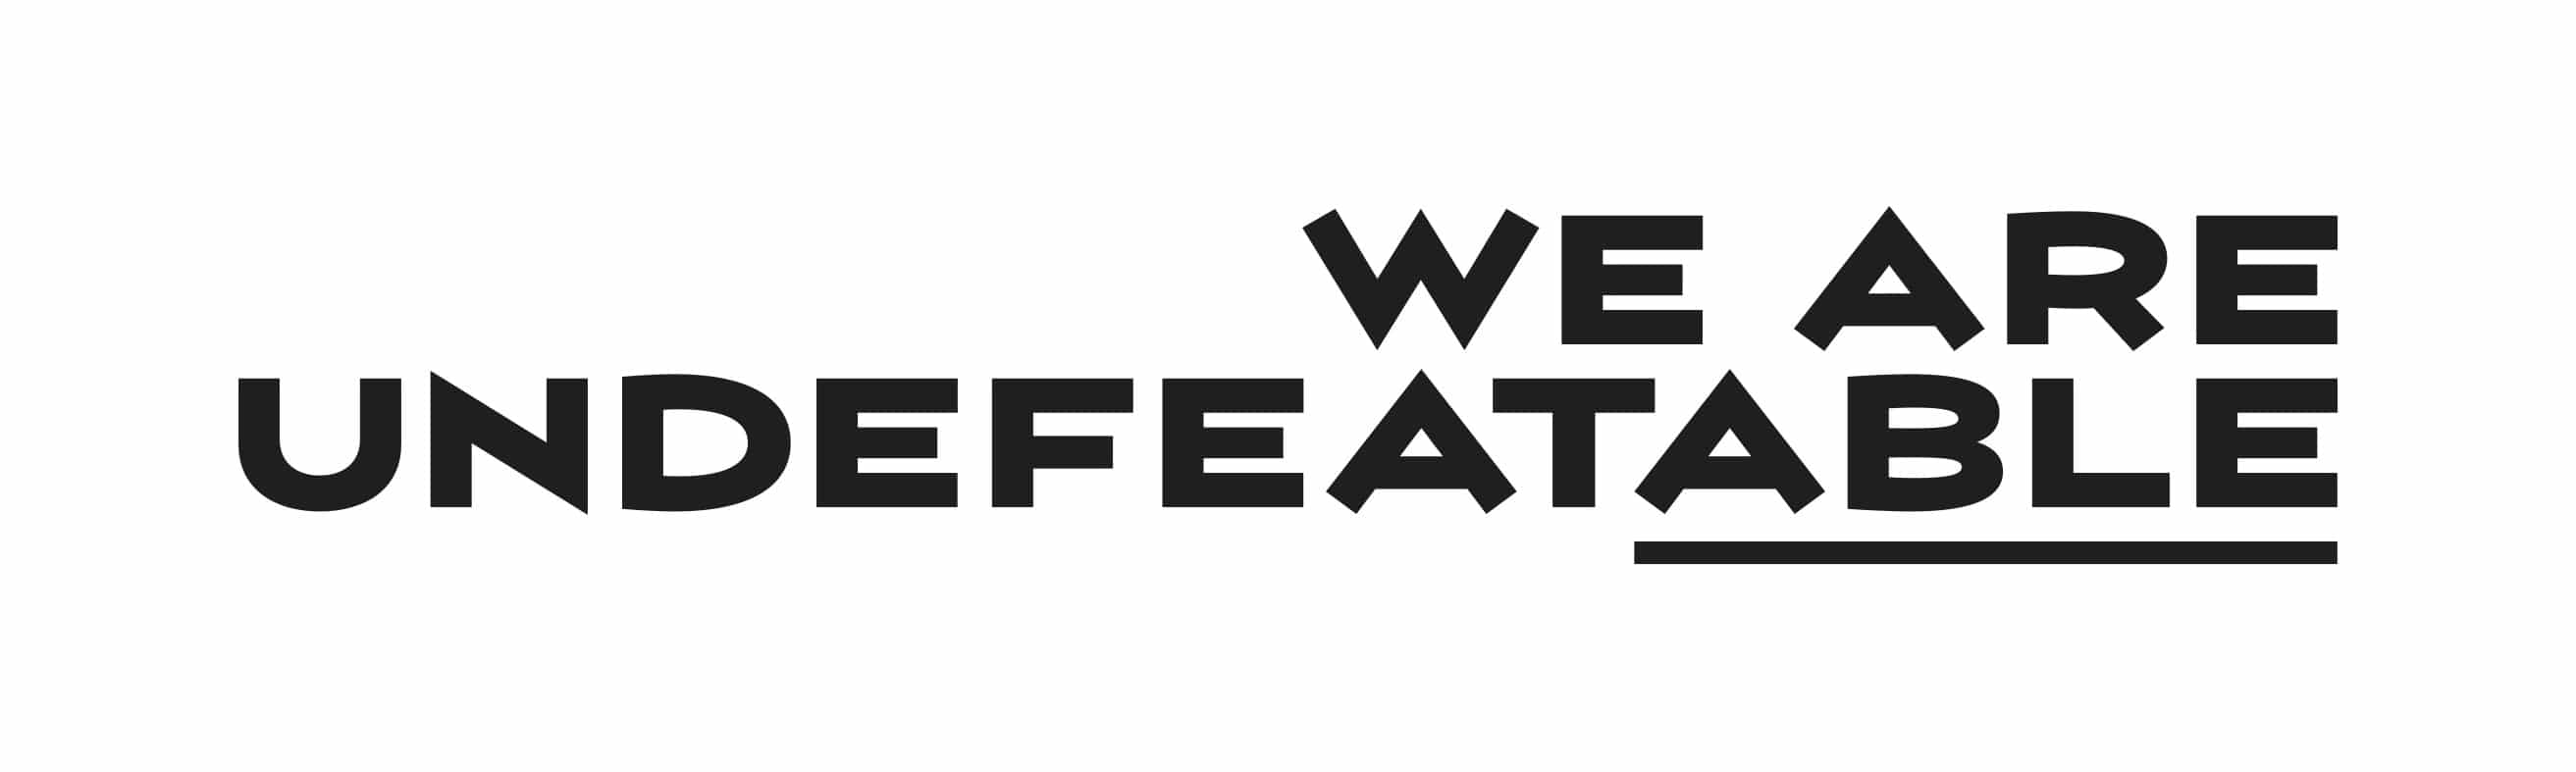 We Are Undefeatable Campaign's logo